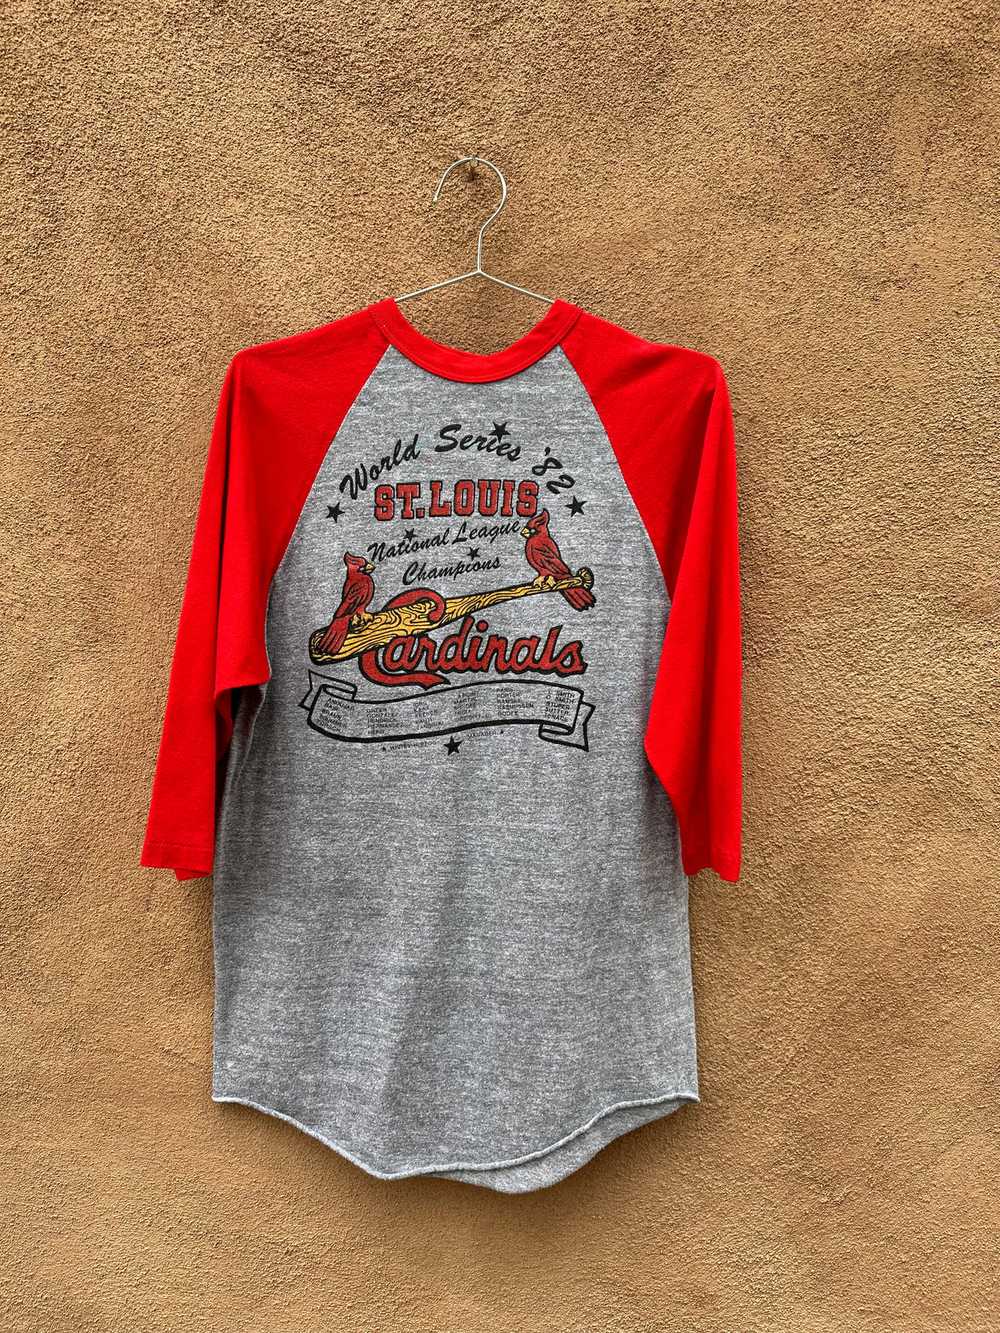 1982 World Series Champs St. Louis Cardinals Tee - image 1